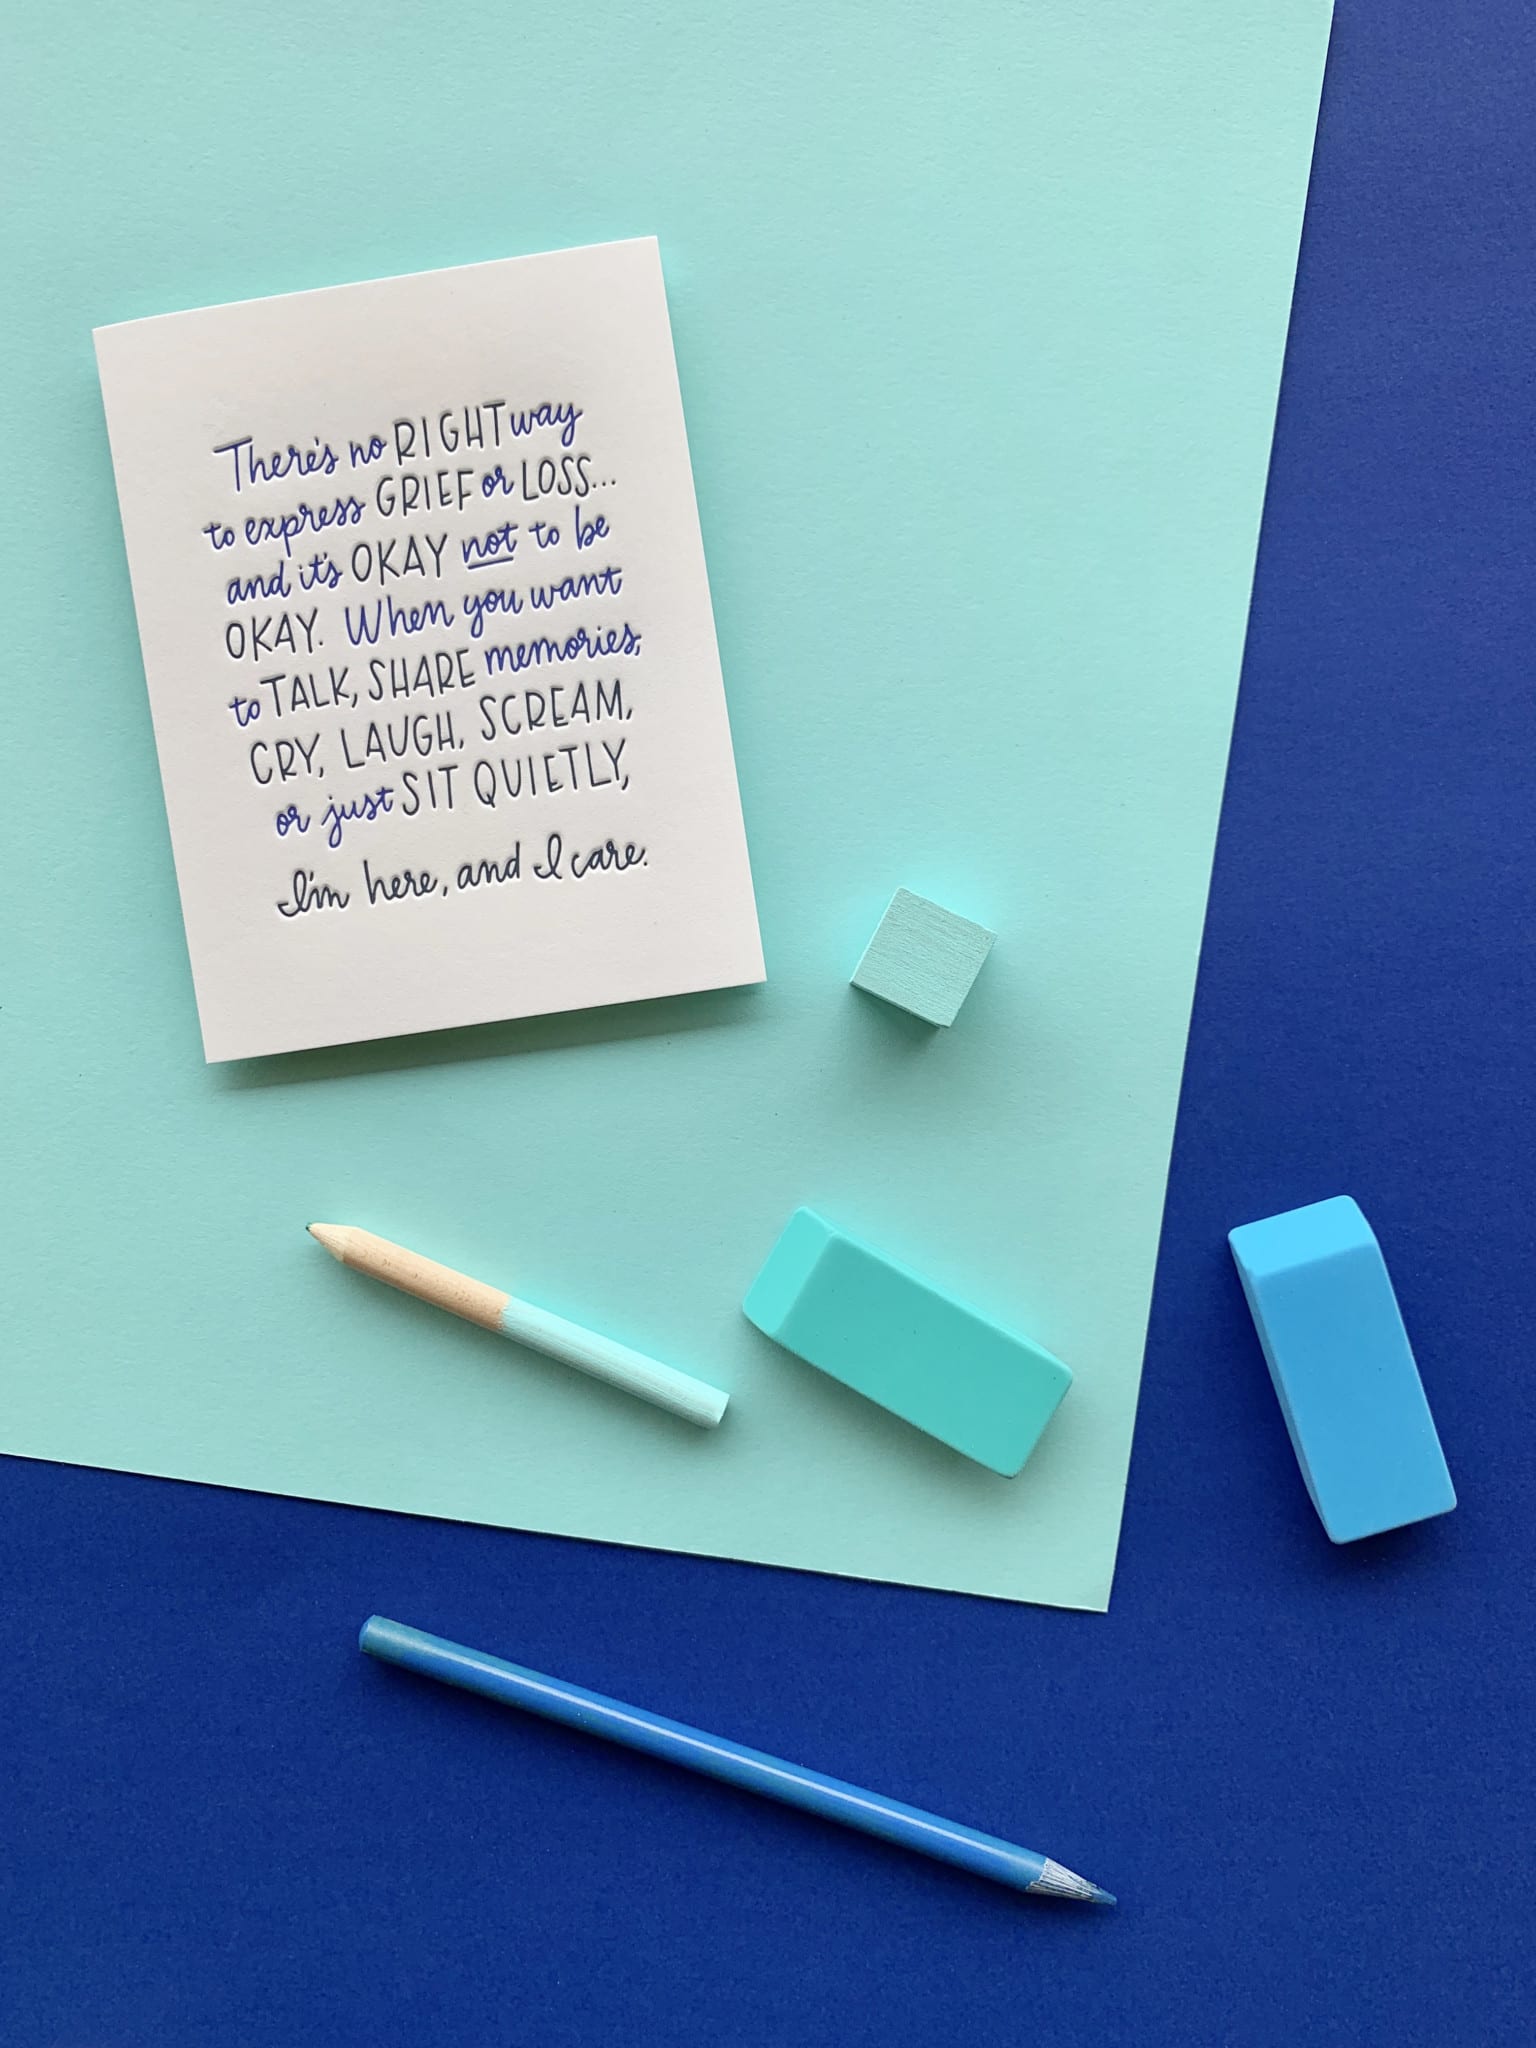 Words of encouragement for times of grief cover this greeting card. The composition in completed by several blue color desk objects spread over a multi-layered paper background.